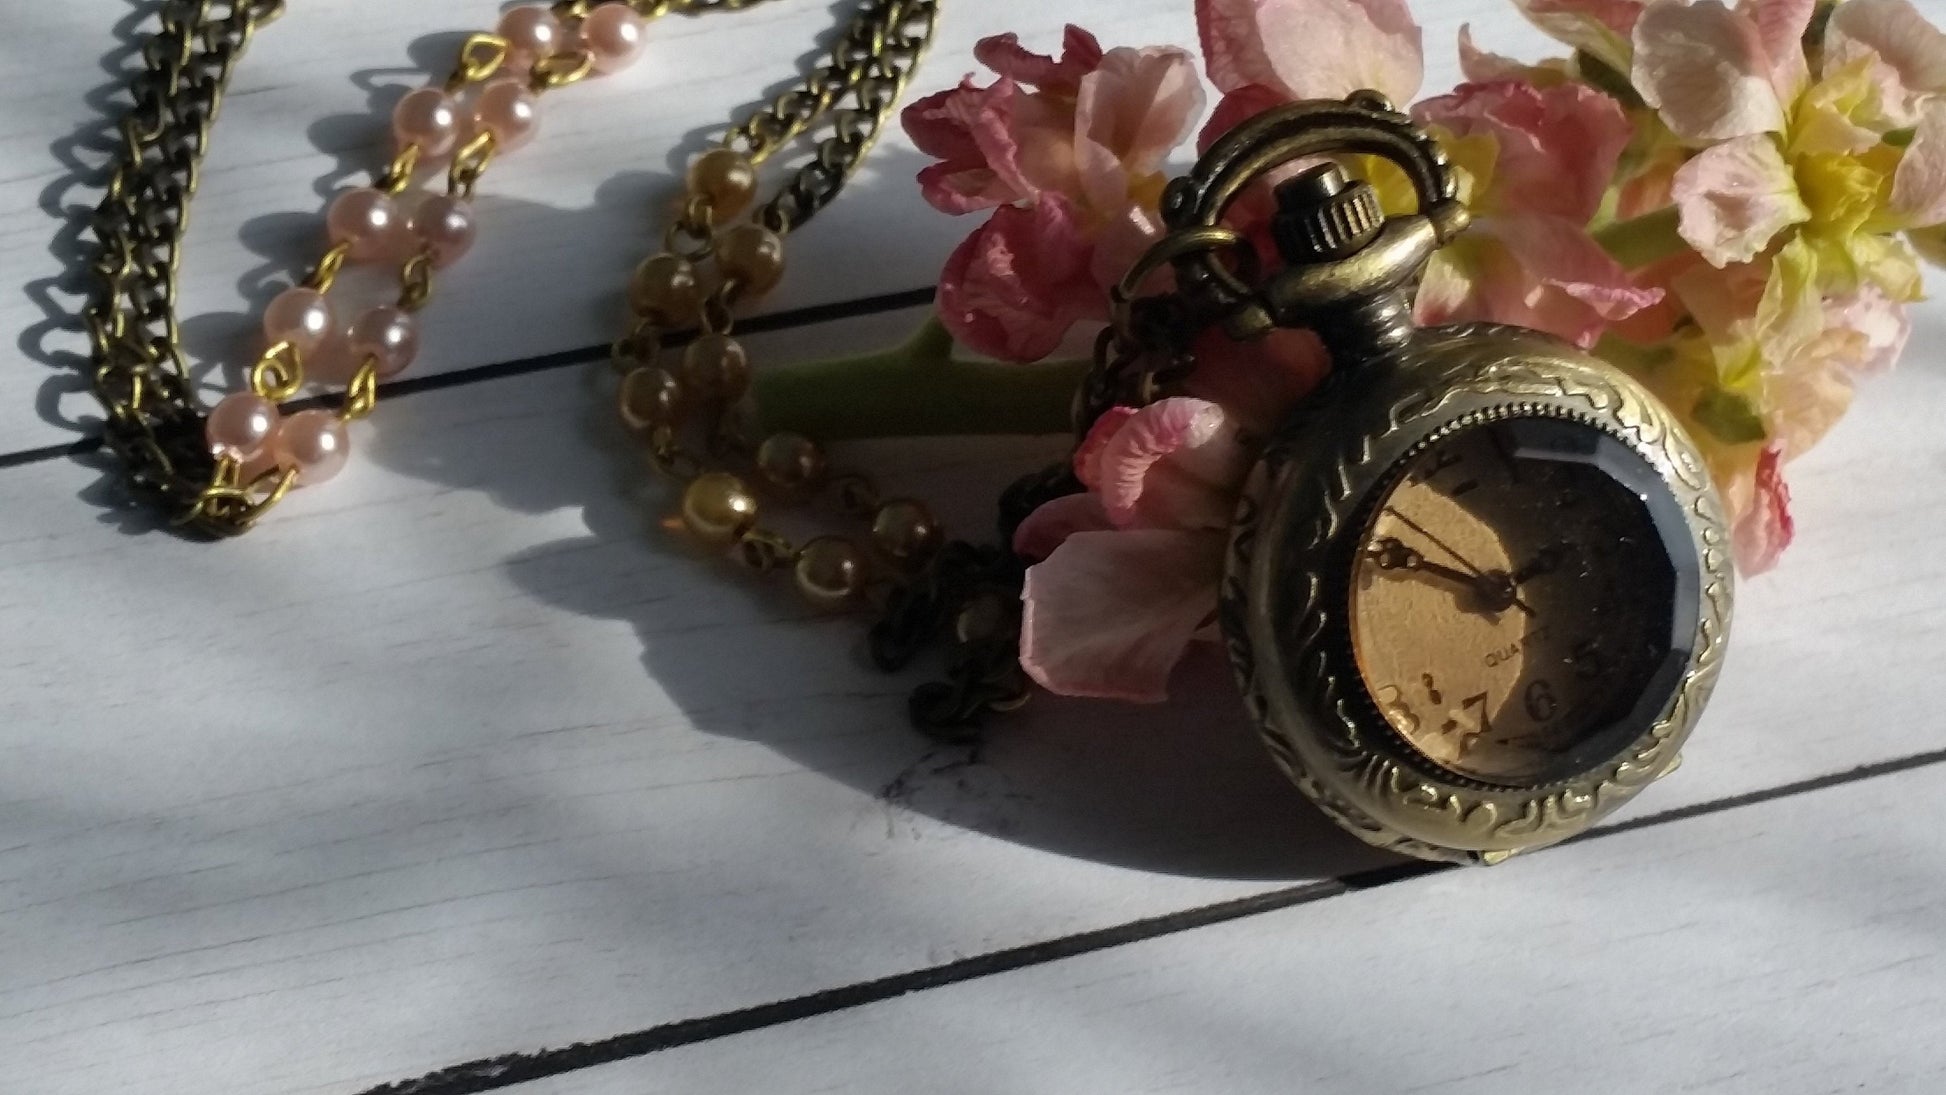 Watch Necklace, Locket, Locket Necklace, Clock Necklace, Weddings, Victorian Watch Necklace, Free Shipping, Summer gifts, July Gifts, Gifts